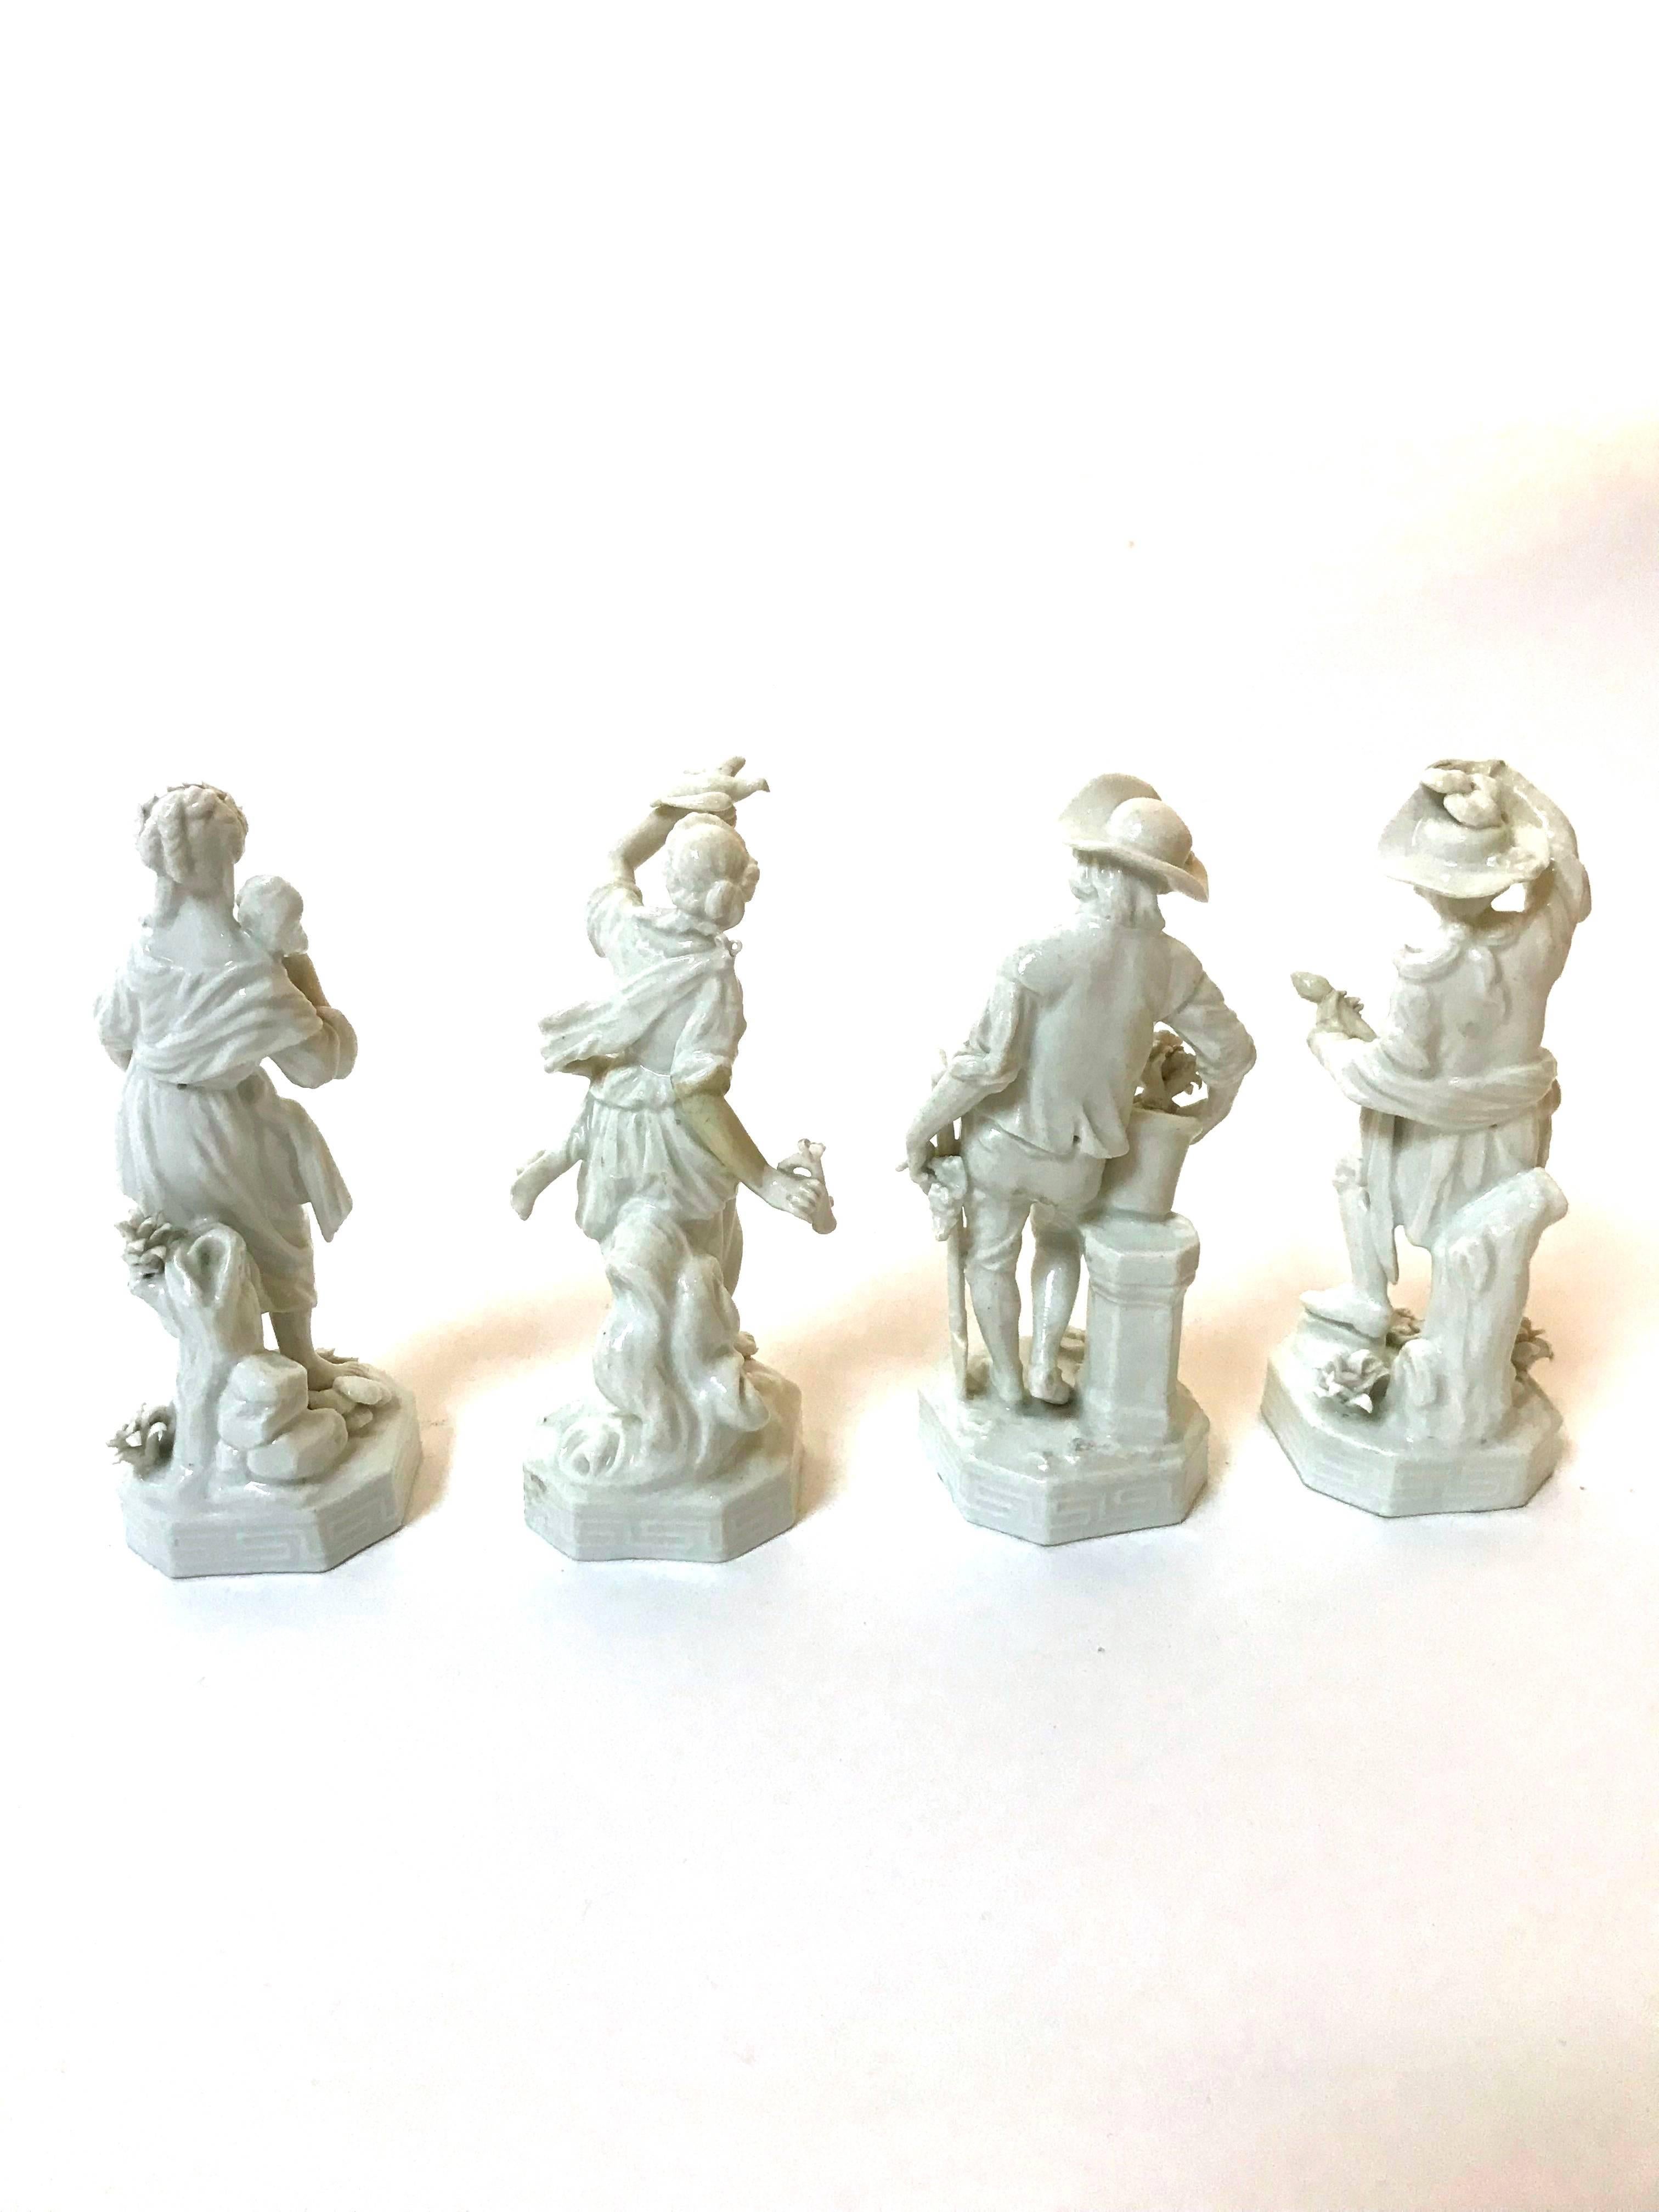 A nice set of four late 19th century blanc de chine porcelain allegorical figurines depicting the Four Seasons, with the blue Bindenschild (beehive) mark of Royal Vienna Porcelain.